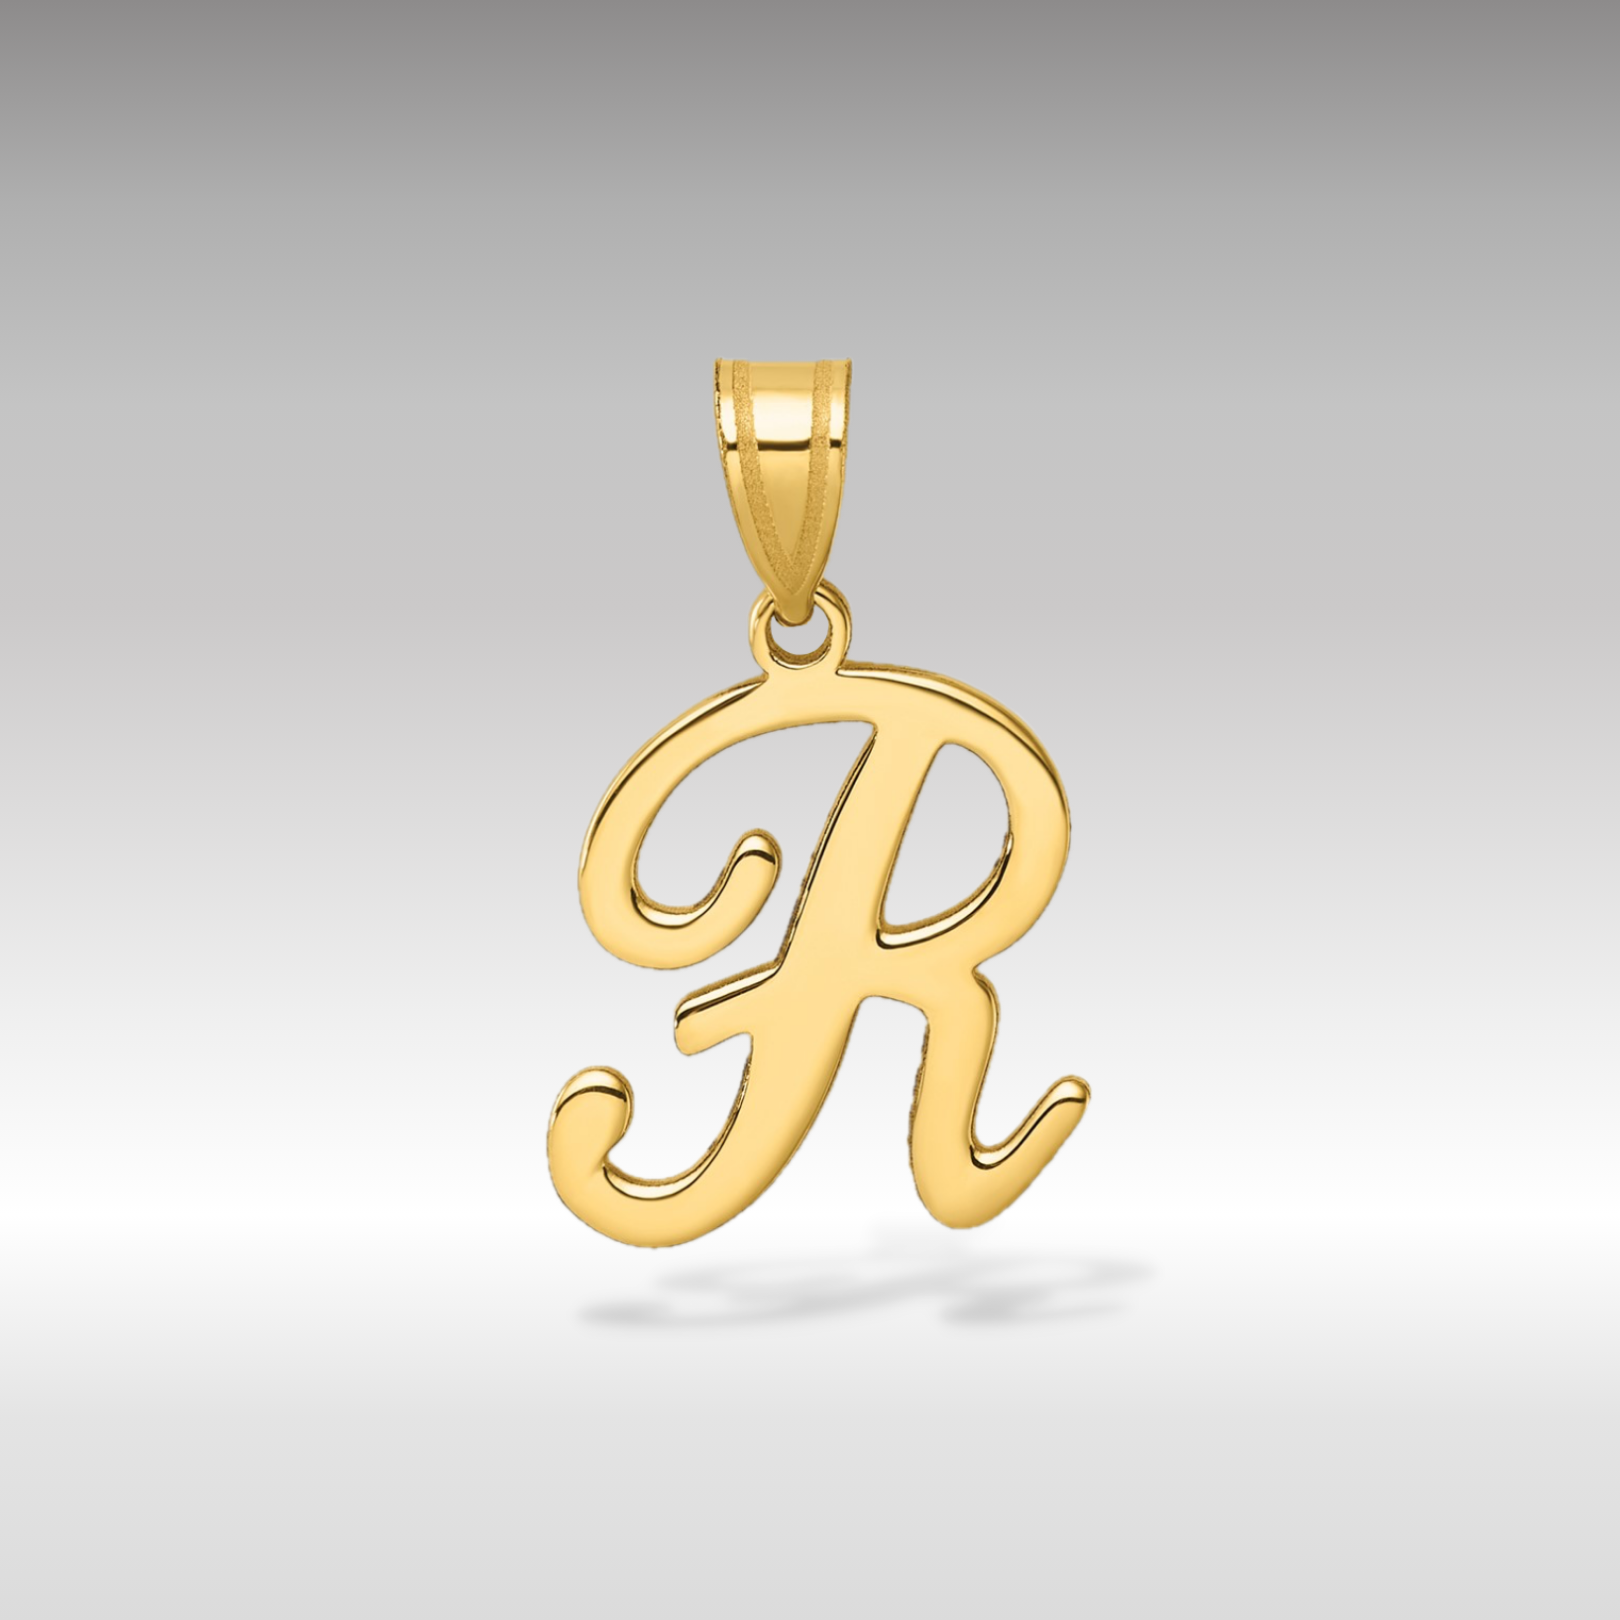 14K Gold Large Letter "R" Script Initial Pendant - Charlie & Co. Jewelry